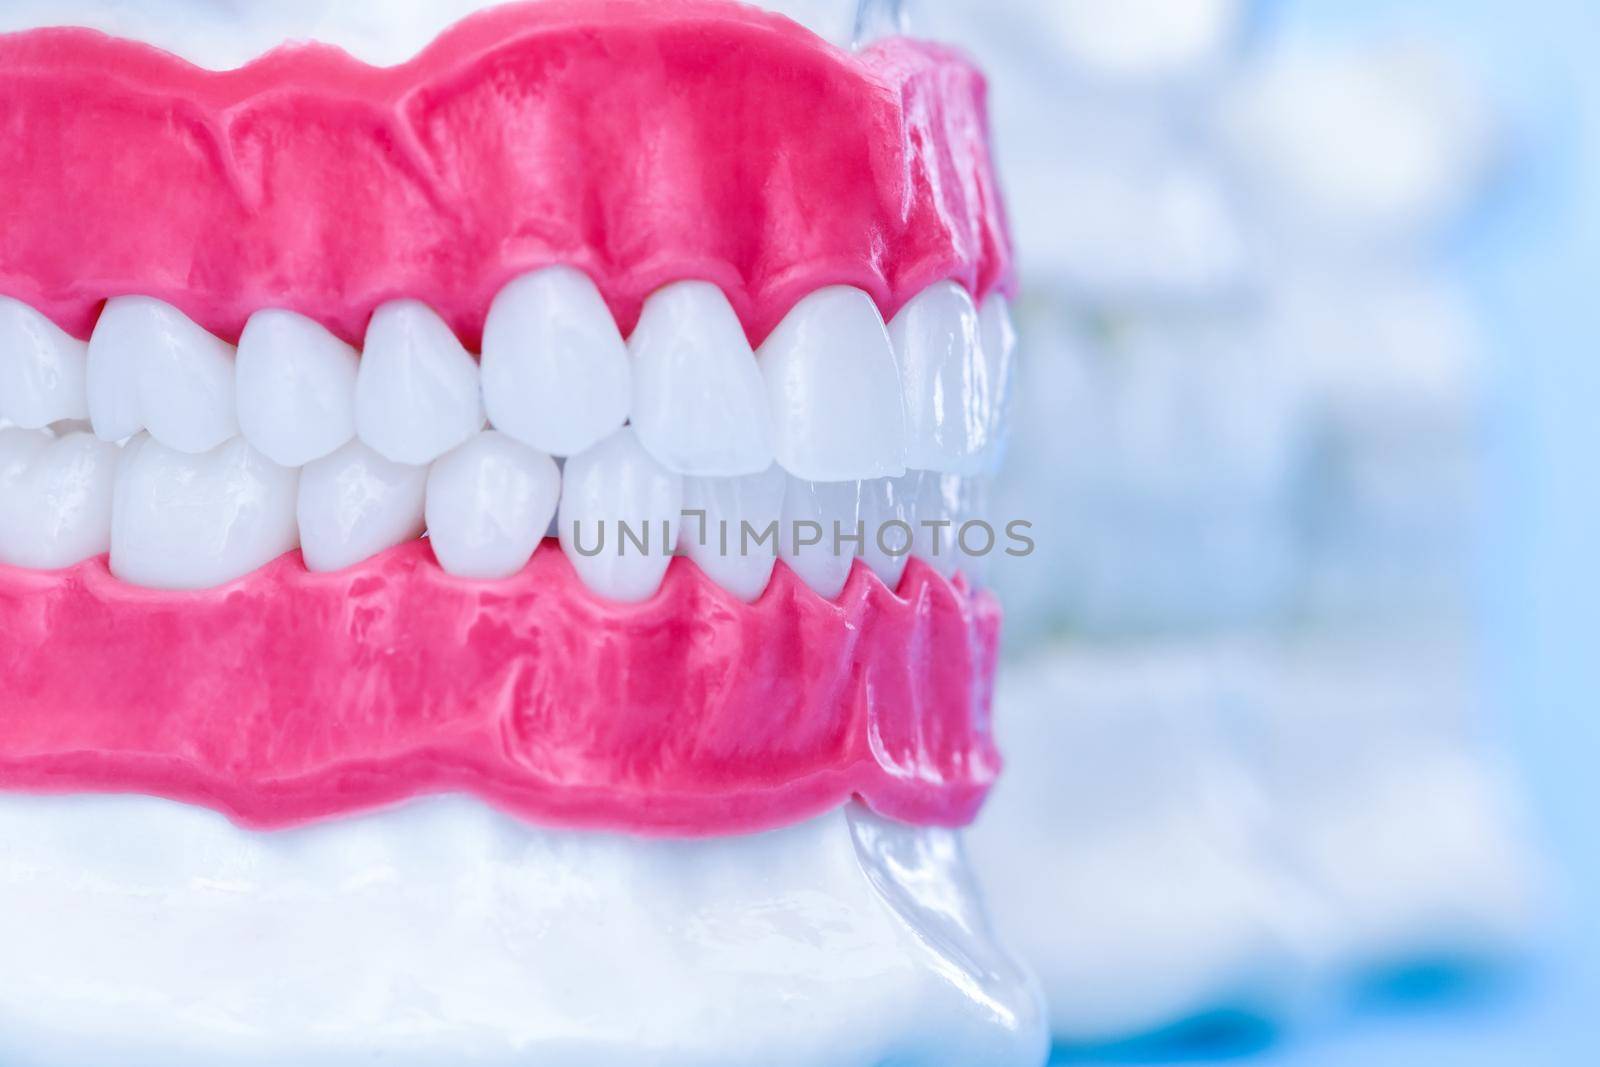 Human jaws with teeth and gums anatomy models medical illustration isolated on blue background. Healthy teeth, dental care and orthodontic concept